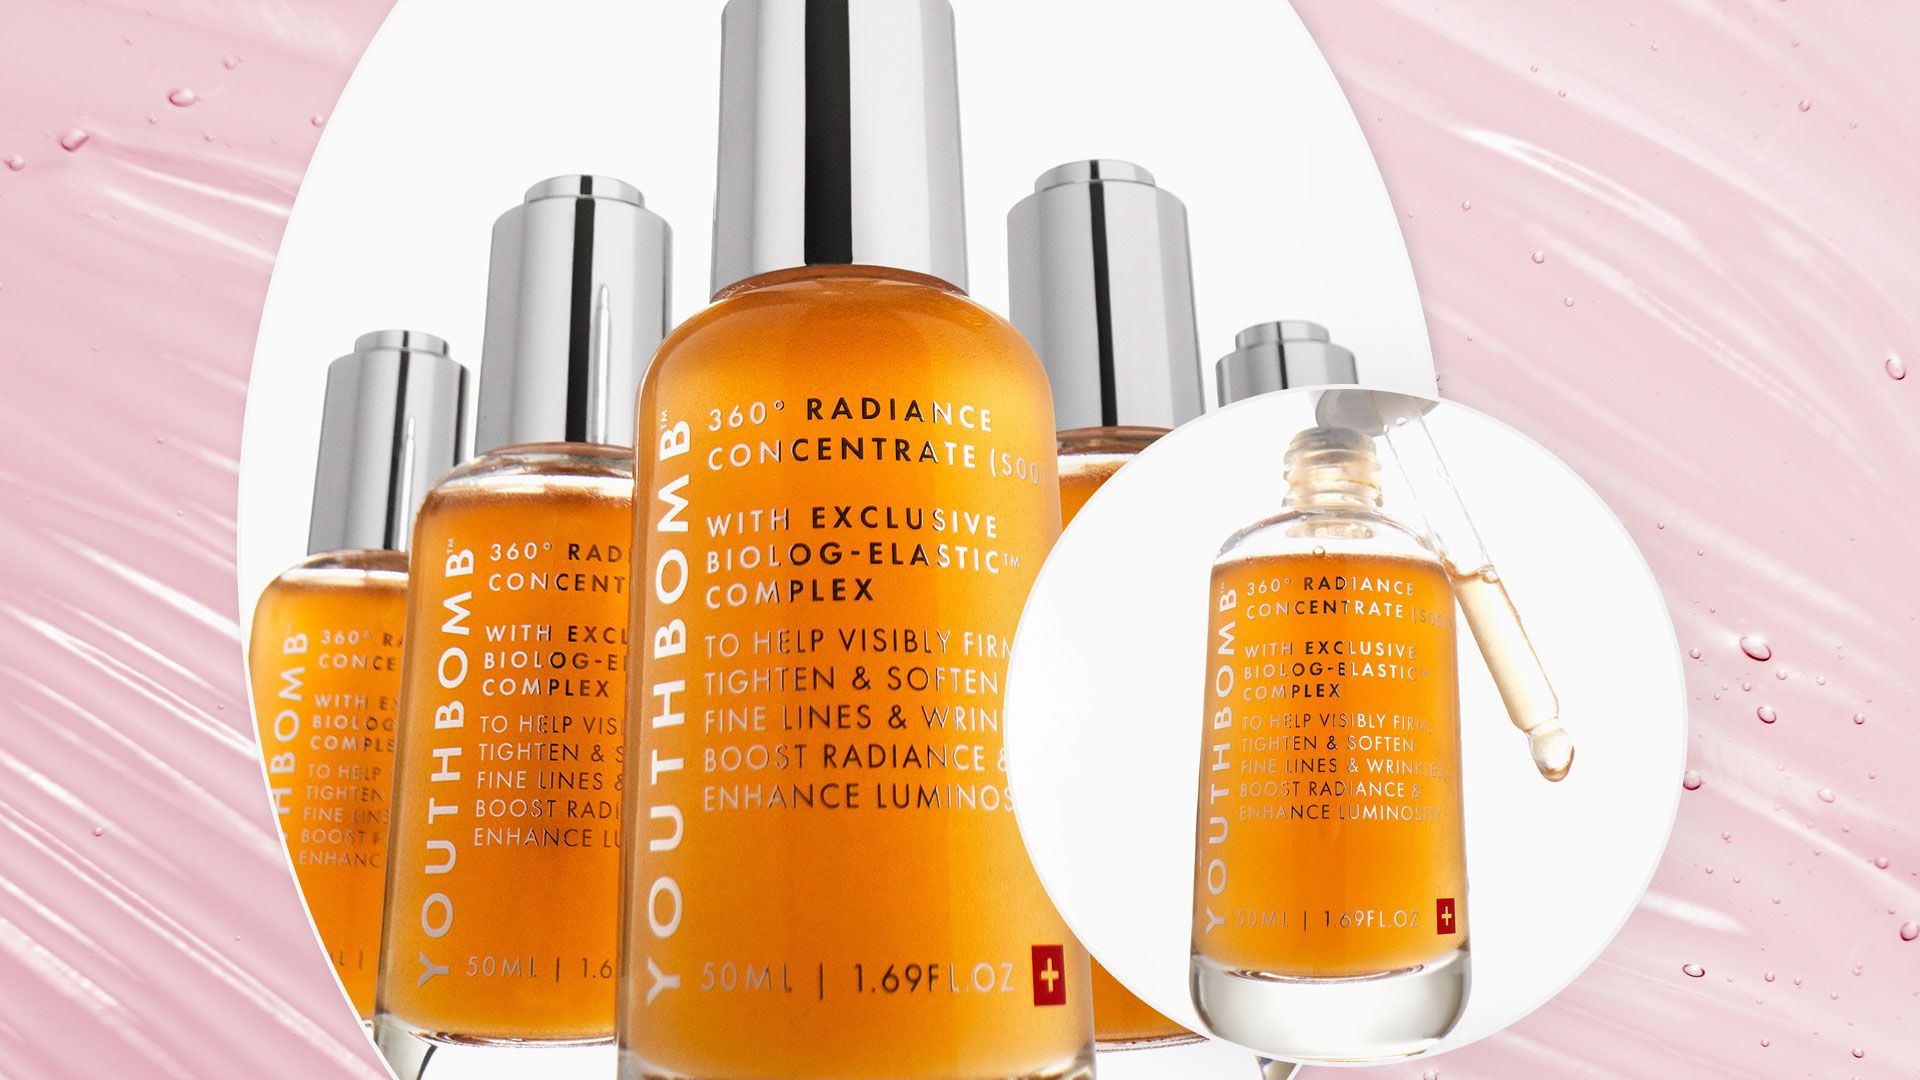 Beauty fans say this glow serum is a 'facelift in a bottle' - here's why